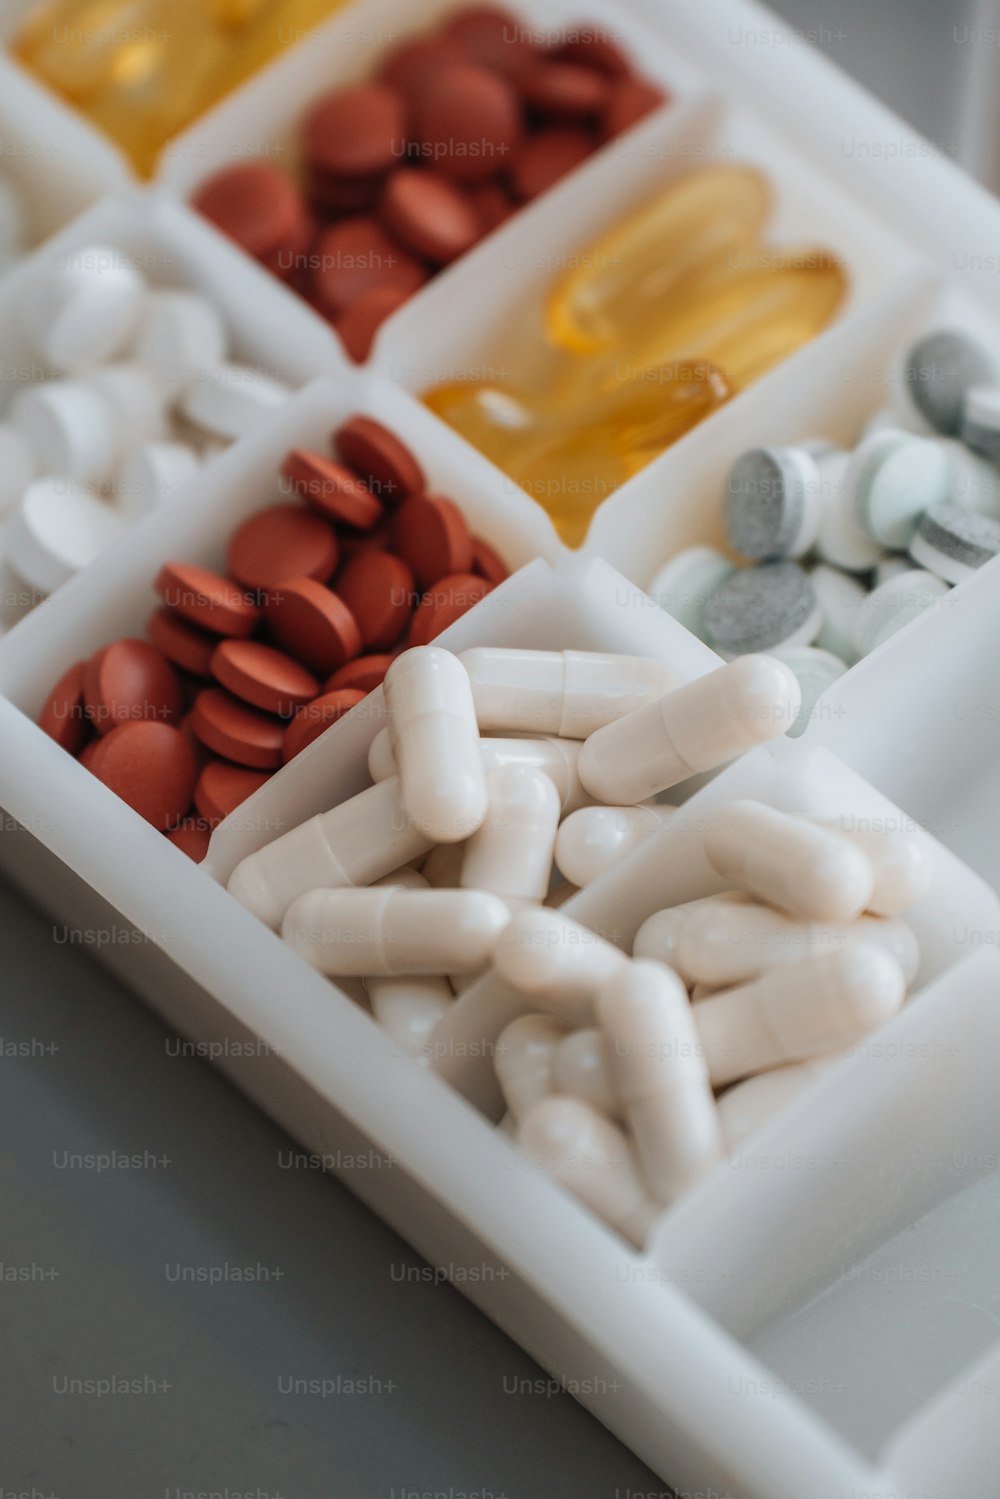 a white tray filled with pills and capsules